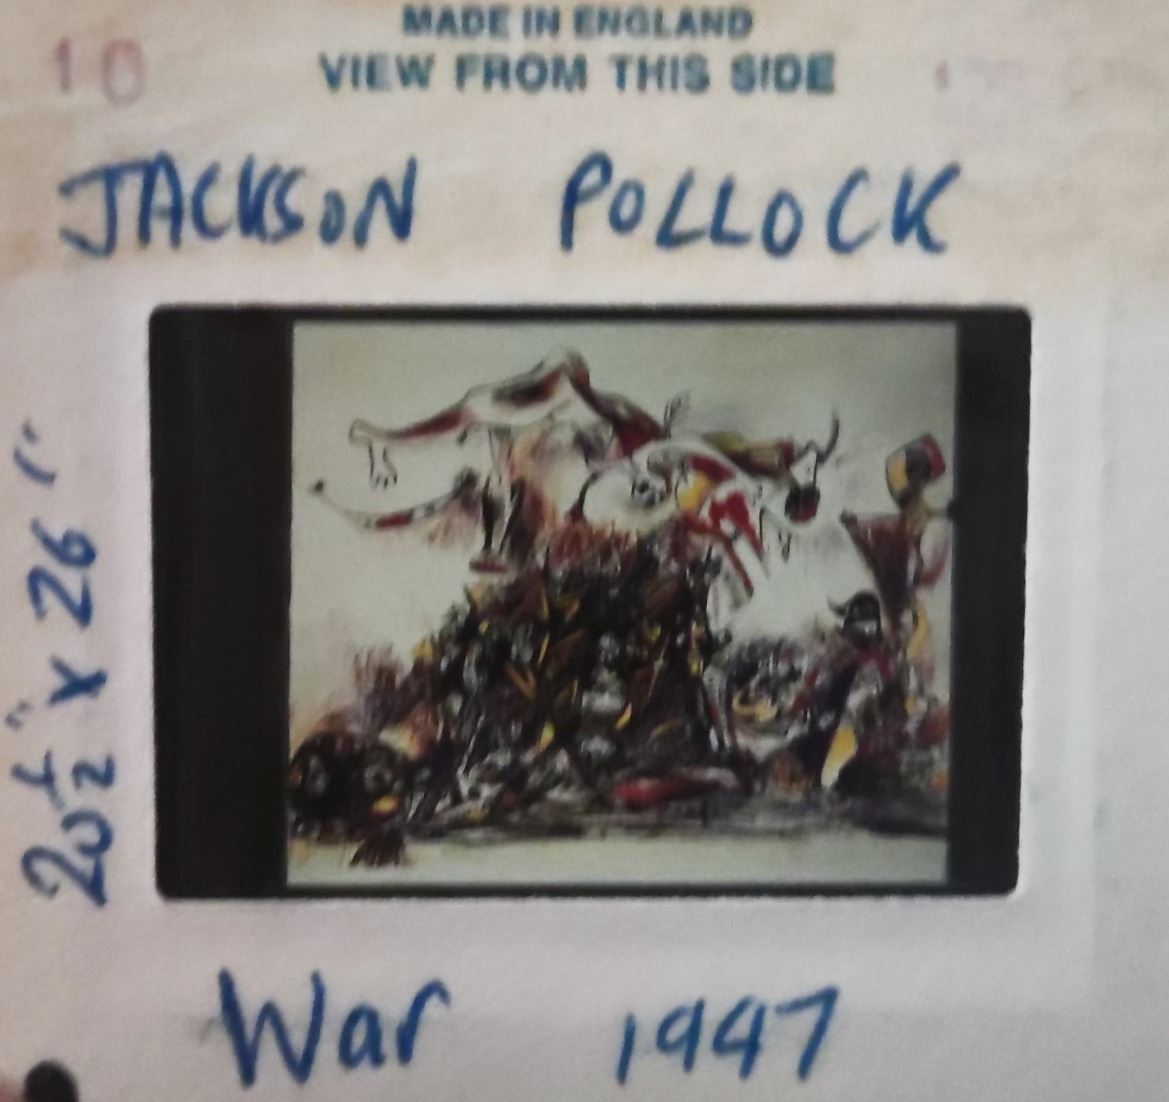 Vintage negatives of Jackson Pollock's 1947 war painting and other untitled painting from 1946. - Image 2 of 3